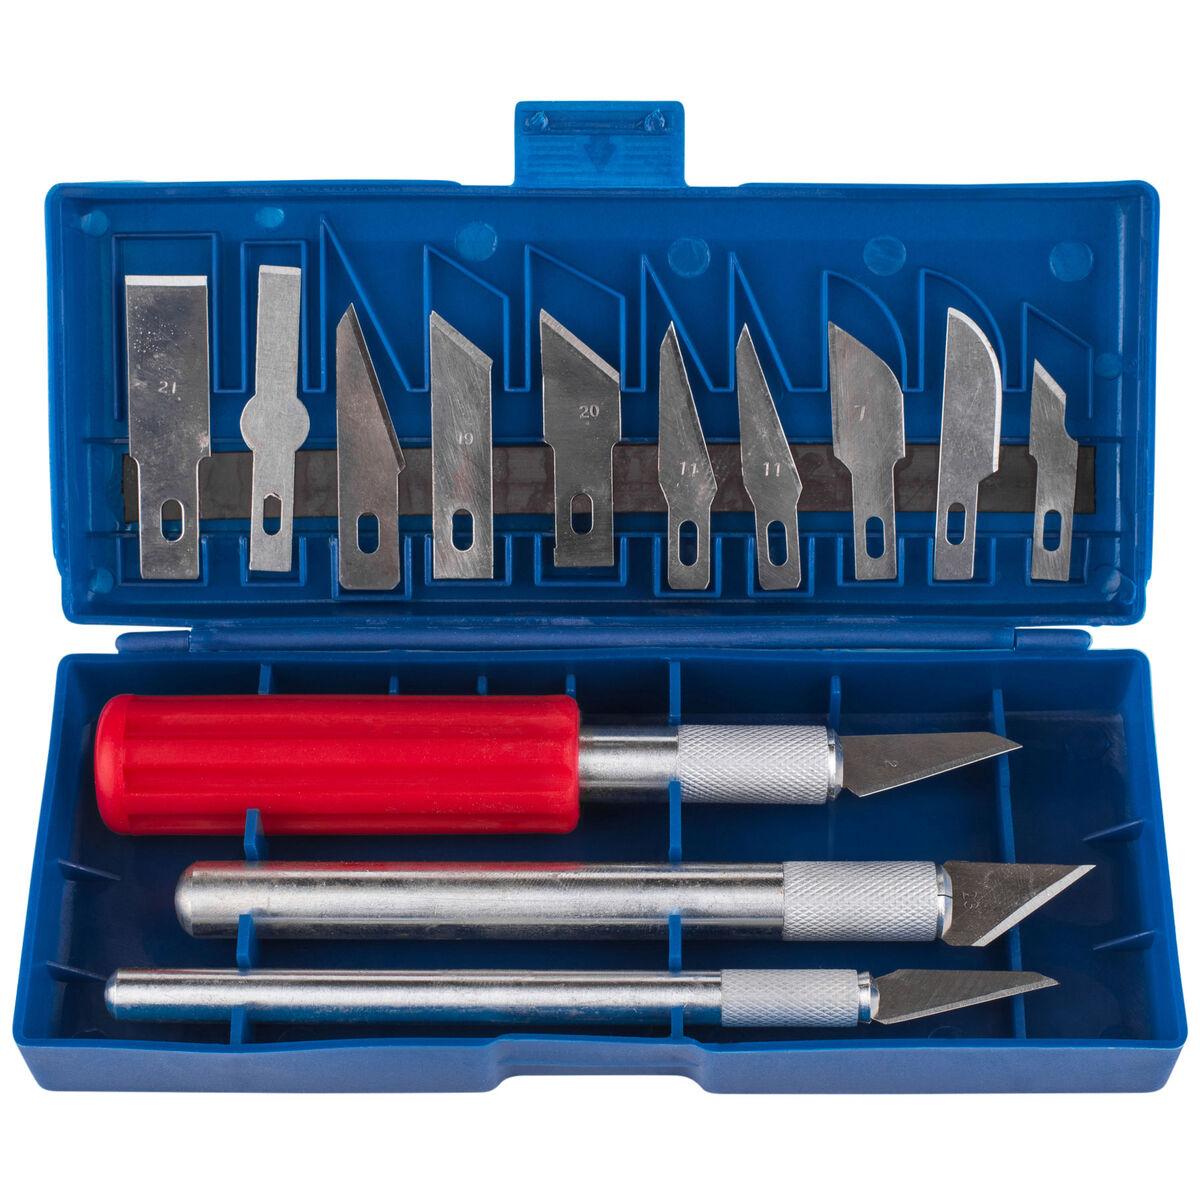 Precision Hobby Knife Set 16 Pieces with Case